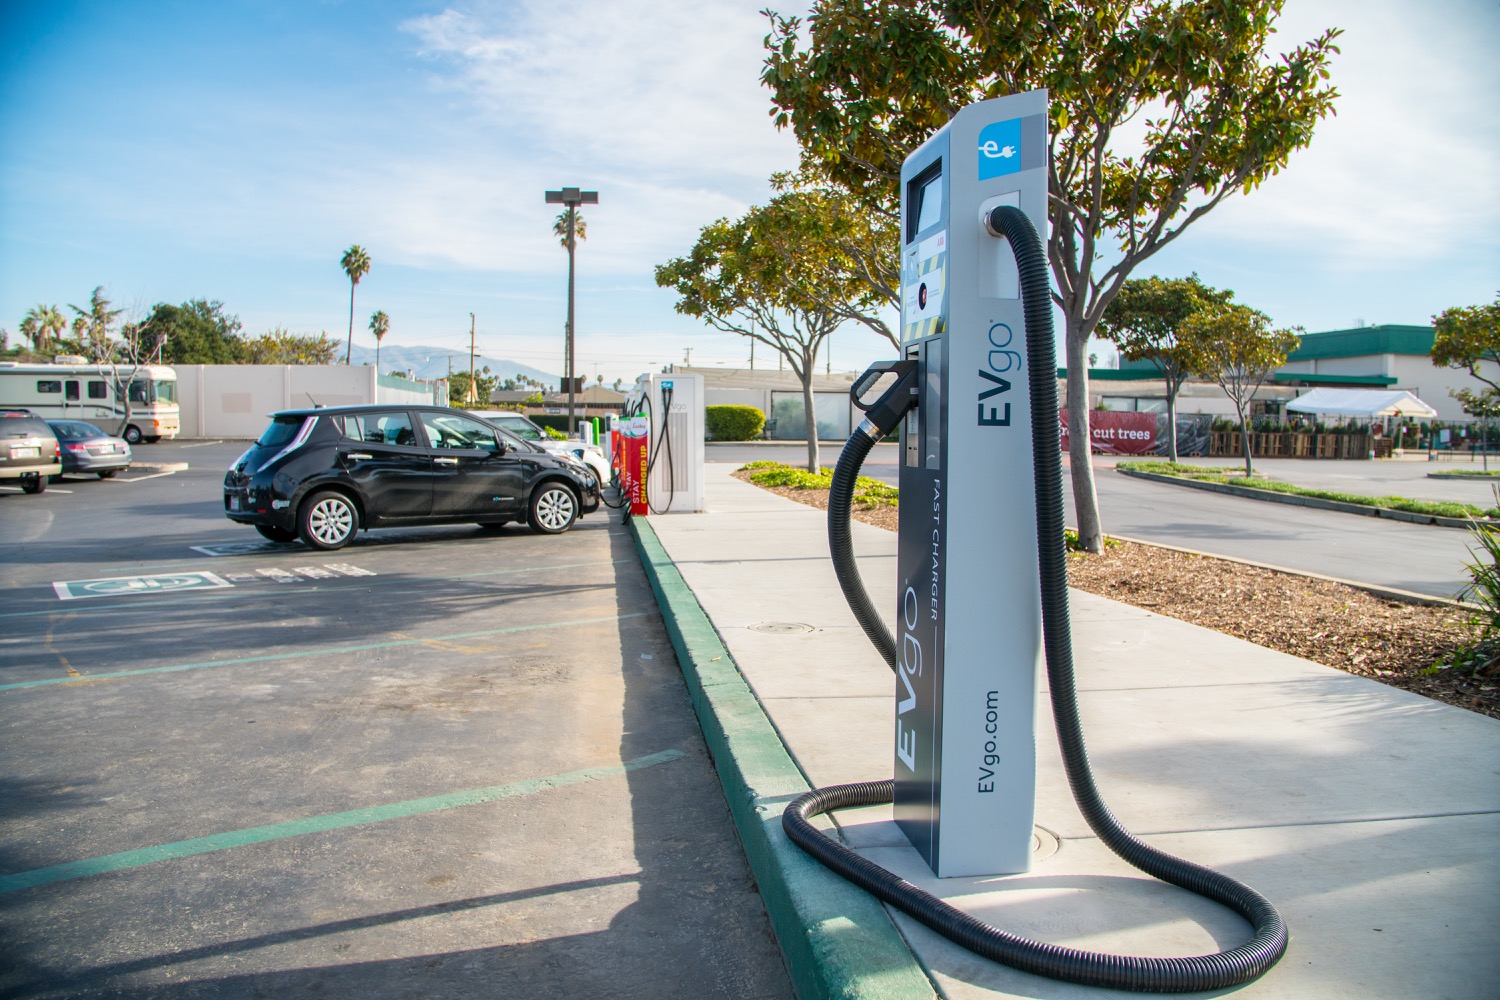 Faster electriccar fast charging test site in Fremont, VW plans 300